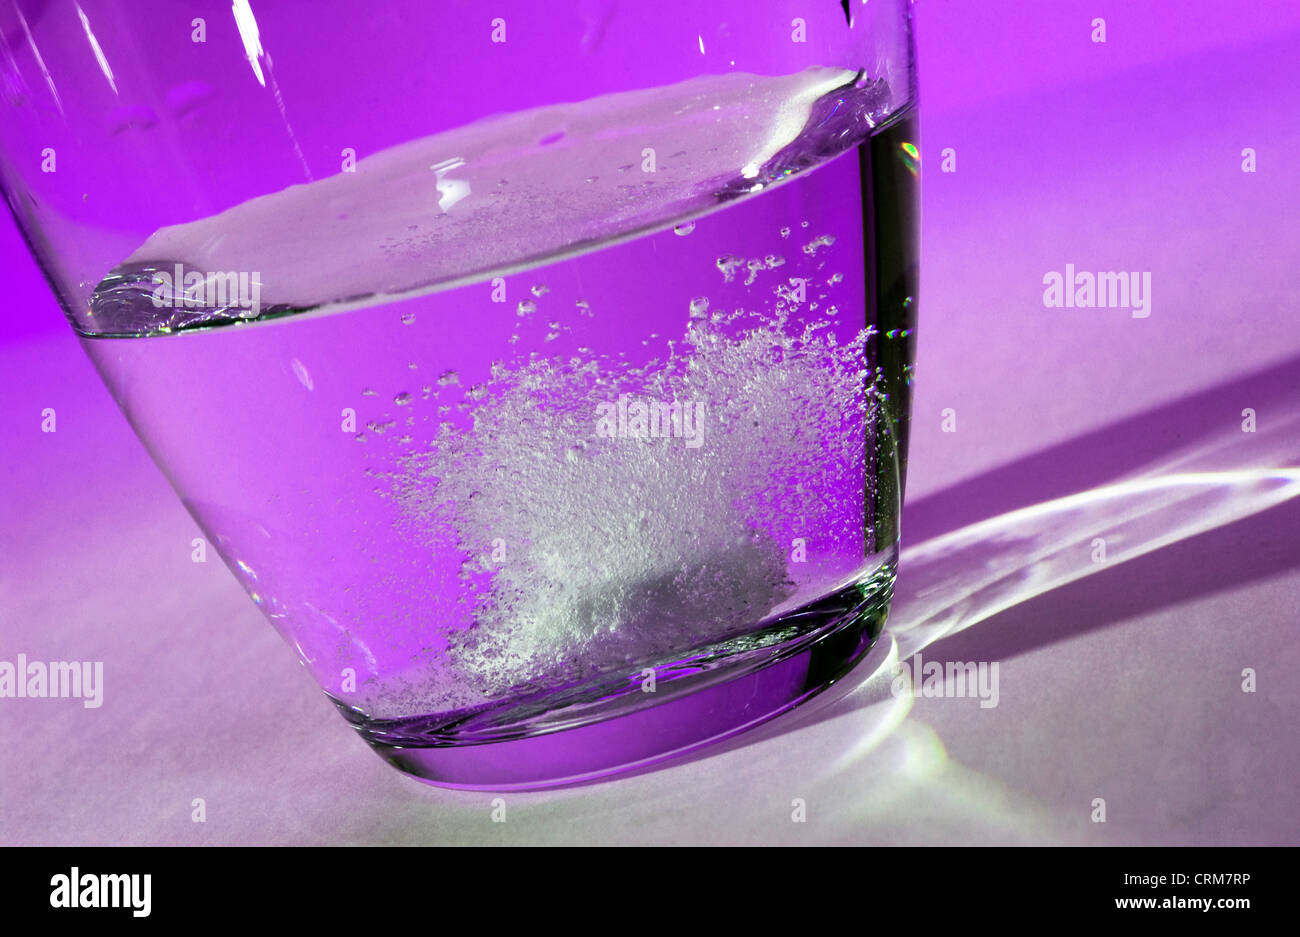 An effervescent tablet dissolves in a glass of water against a purple background. Stock Photo